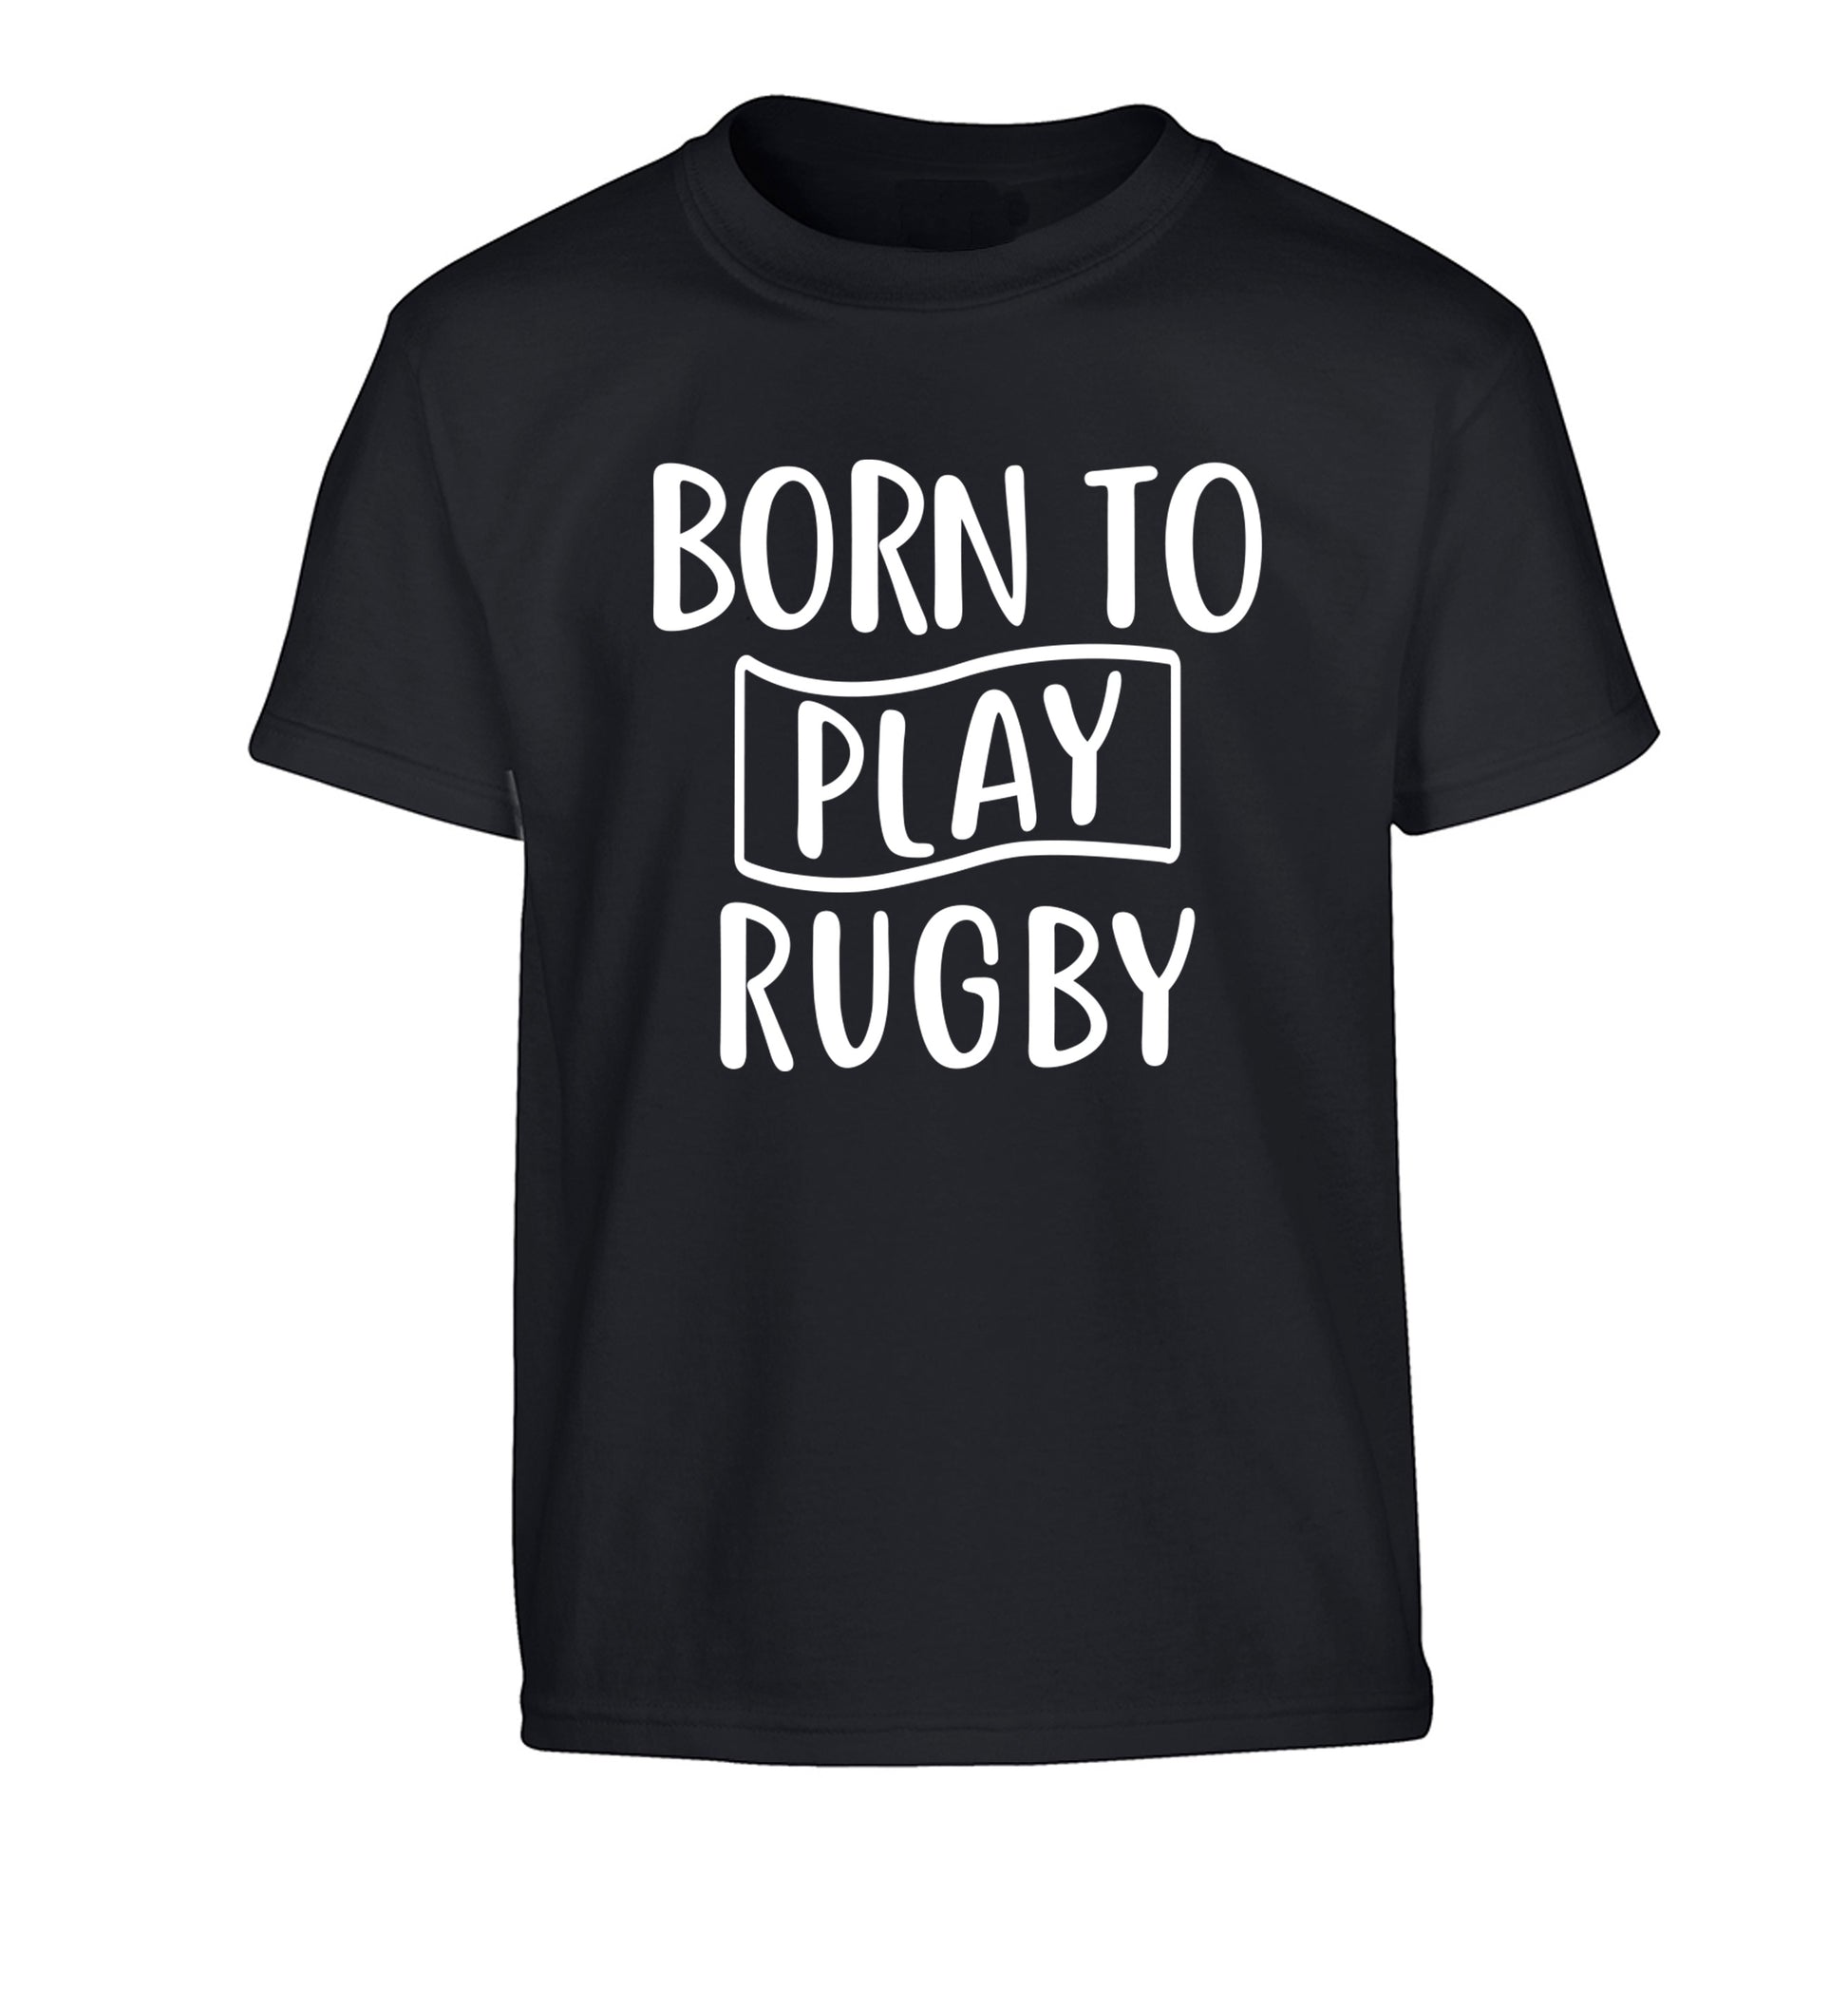 Born to play rugby Children's black Tshirt 12-13 Years